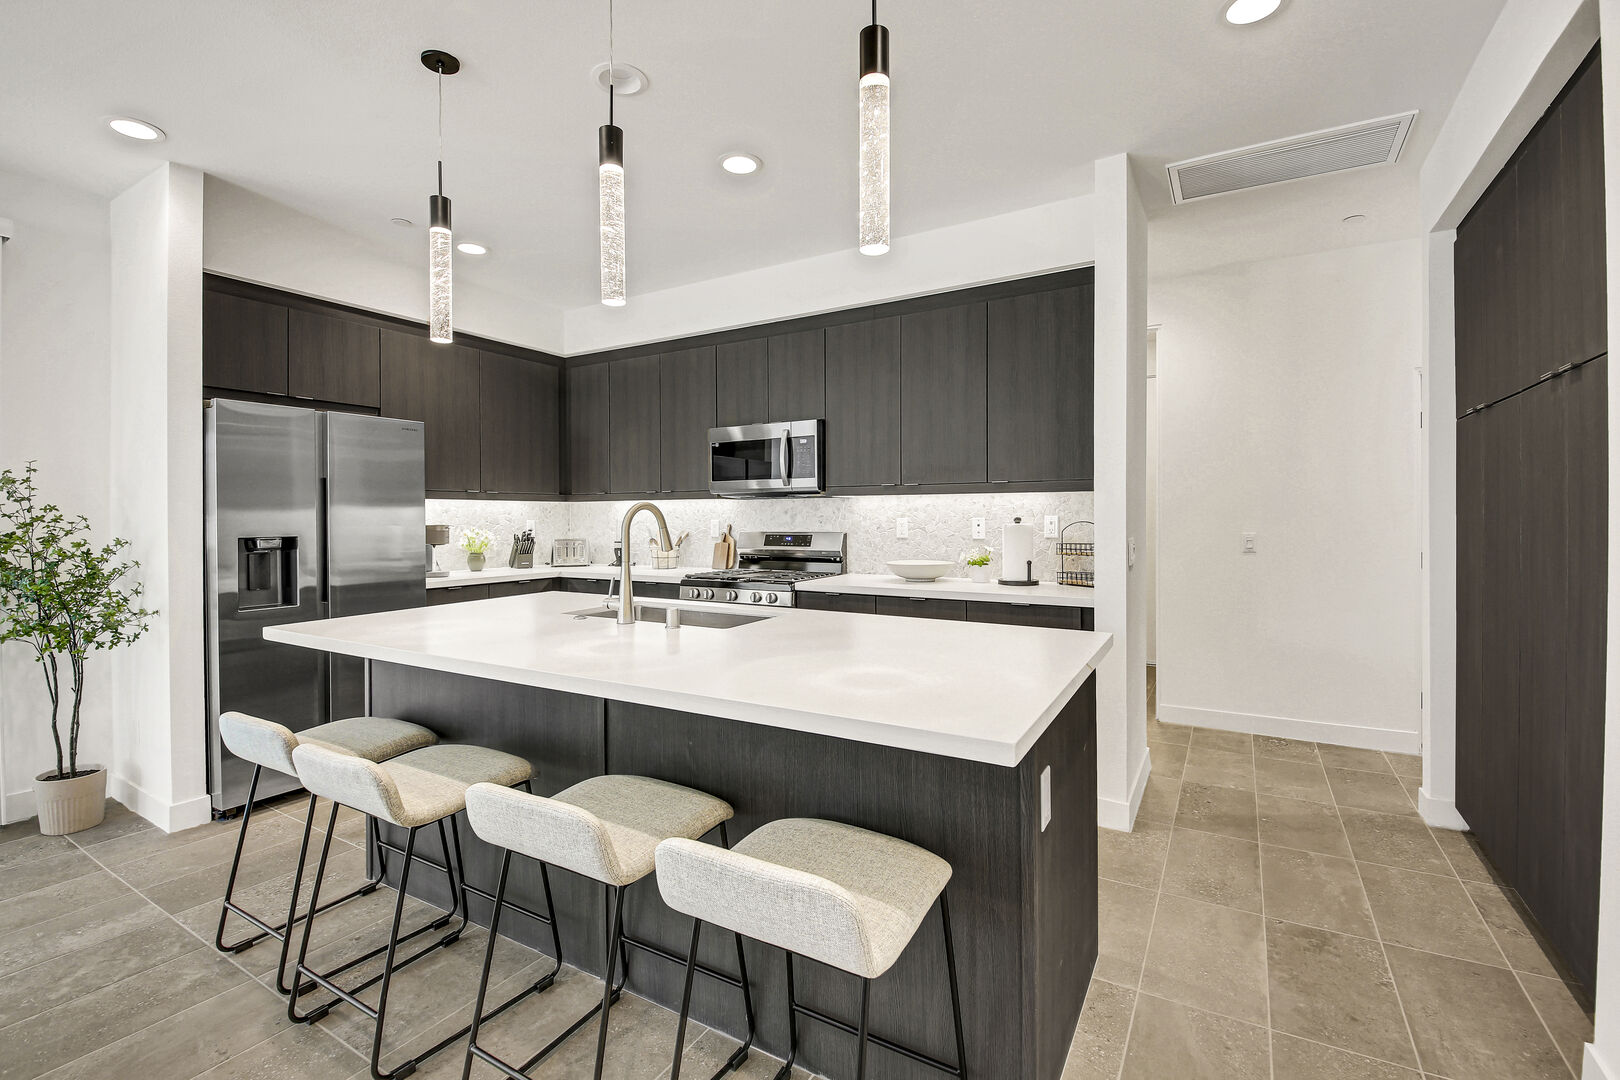 The fully-equipped kitchen features stunning stainless steel appliances, such as a Samsung side-by-side refrigerator with a water and ice dispenser.